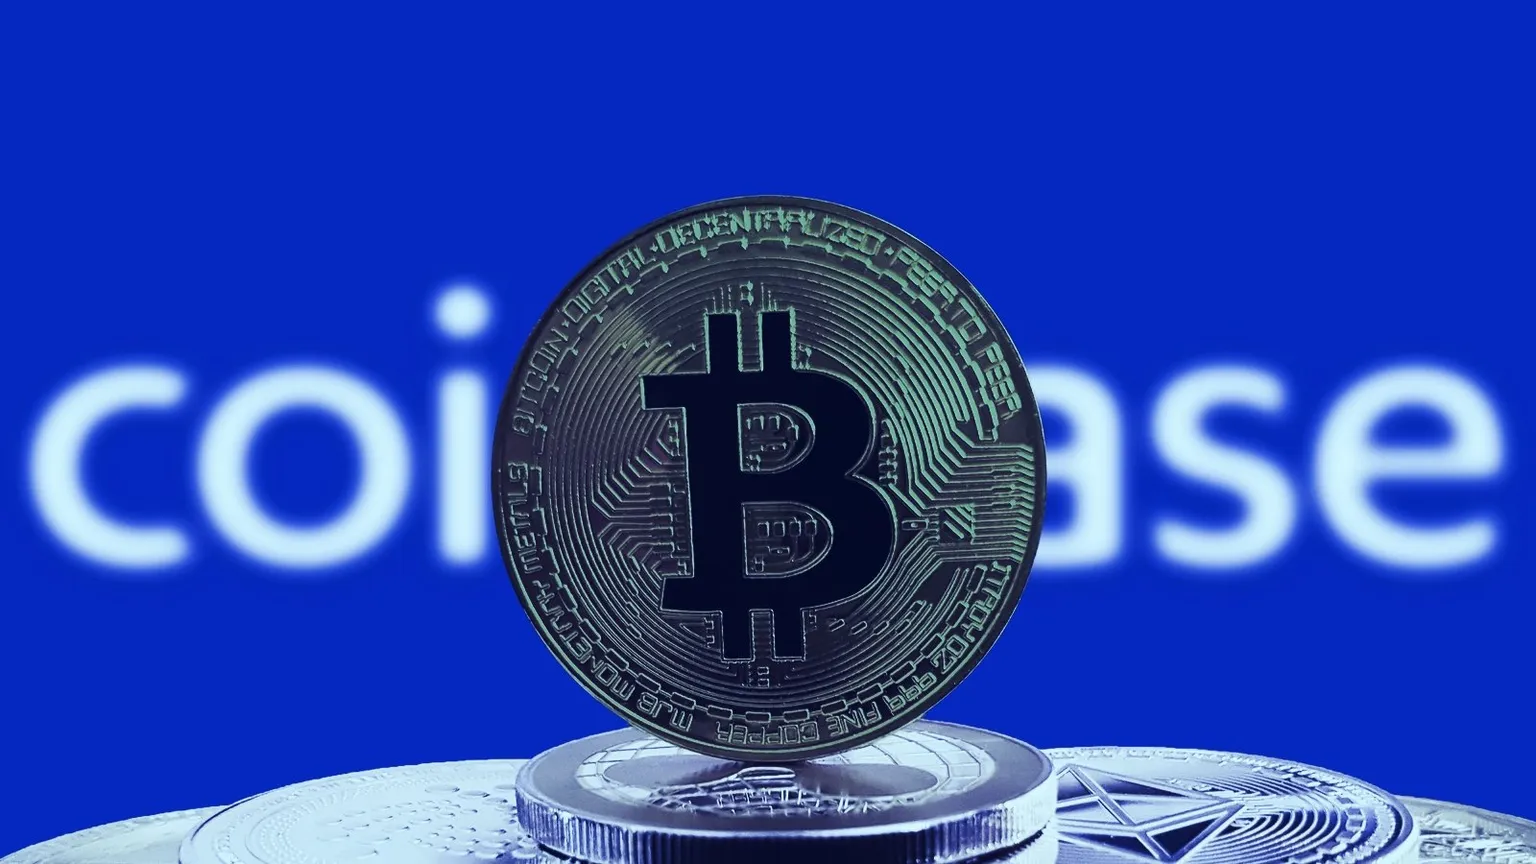 Coinbase is a major cryptocurrency company. Image: Shutterstock